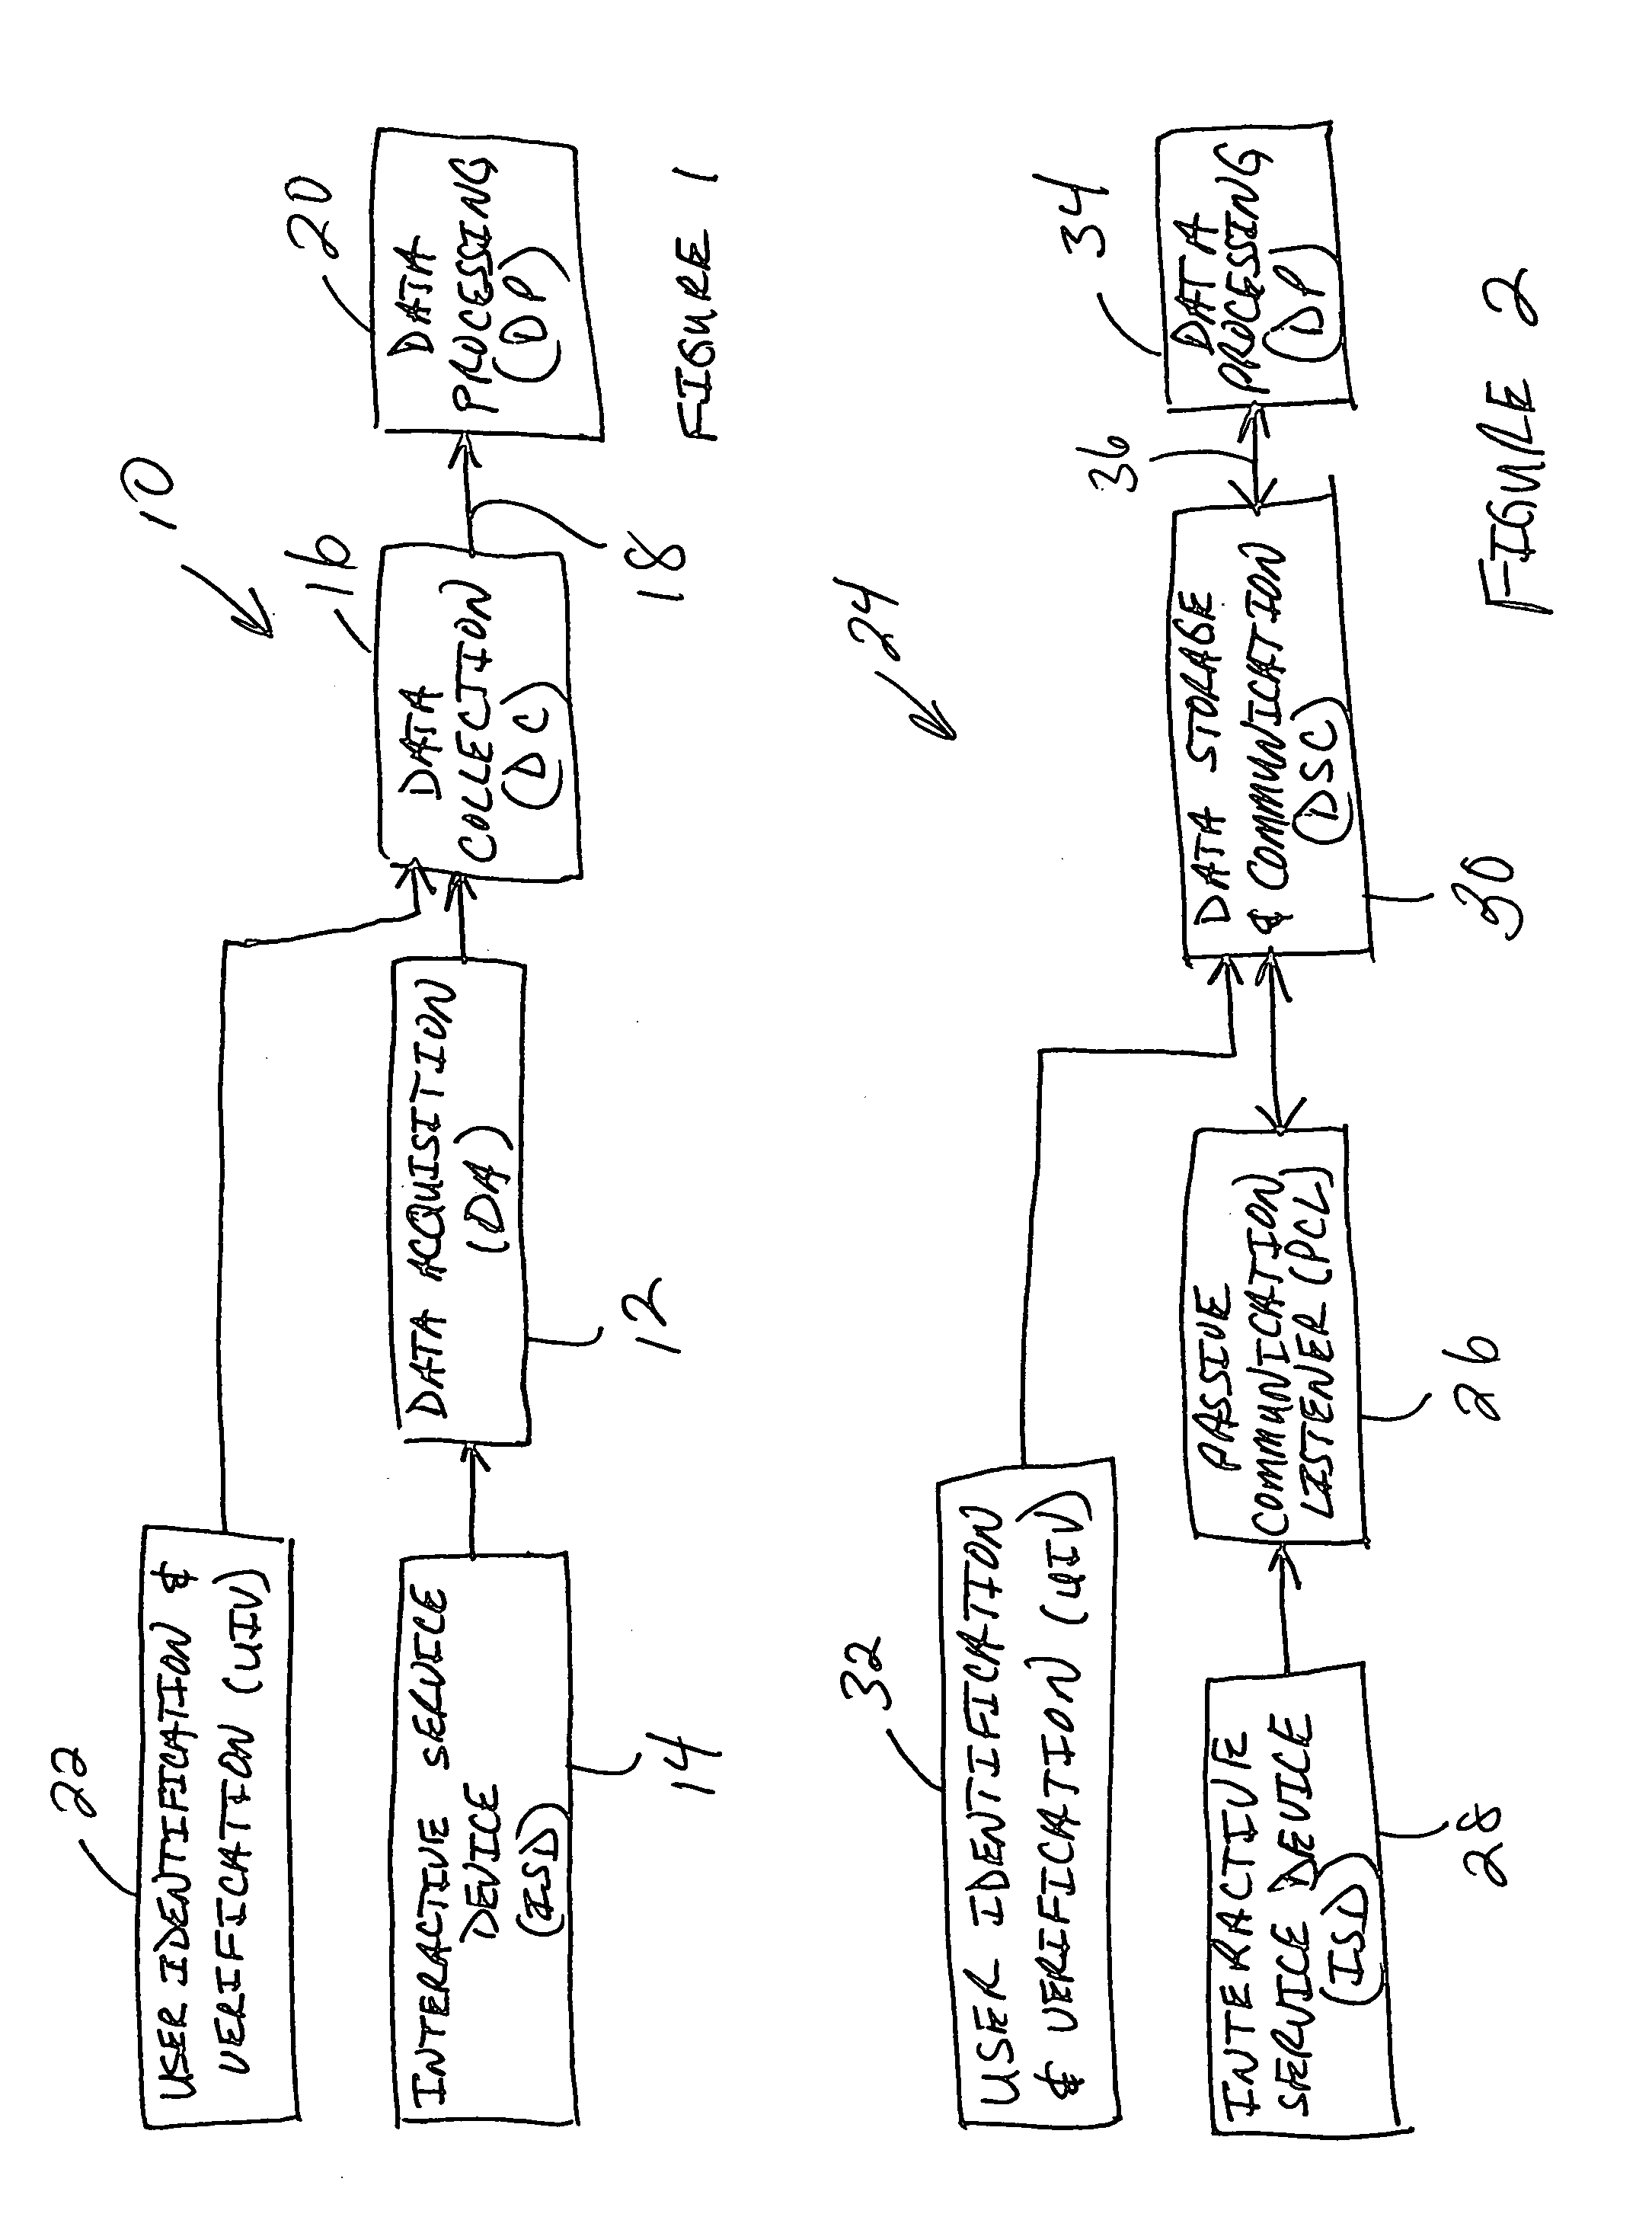 Interactive service device metering systems